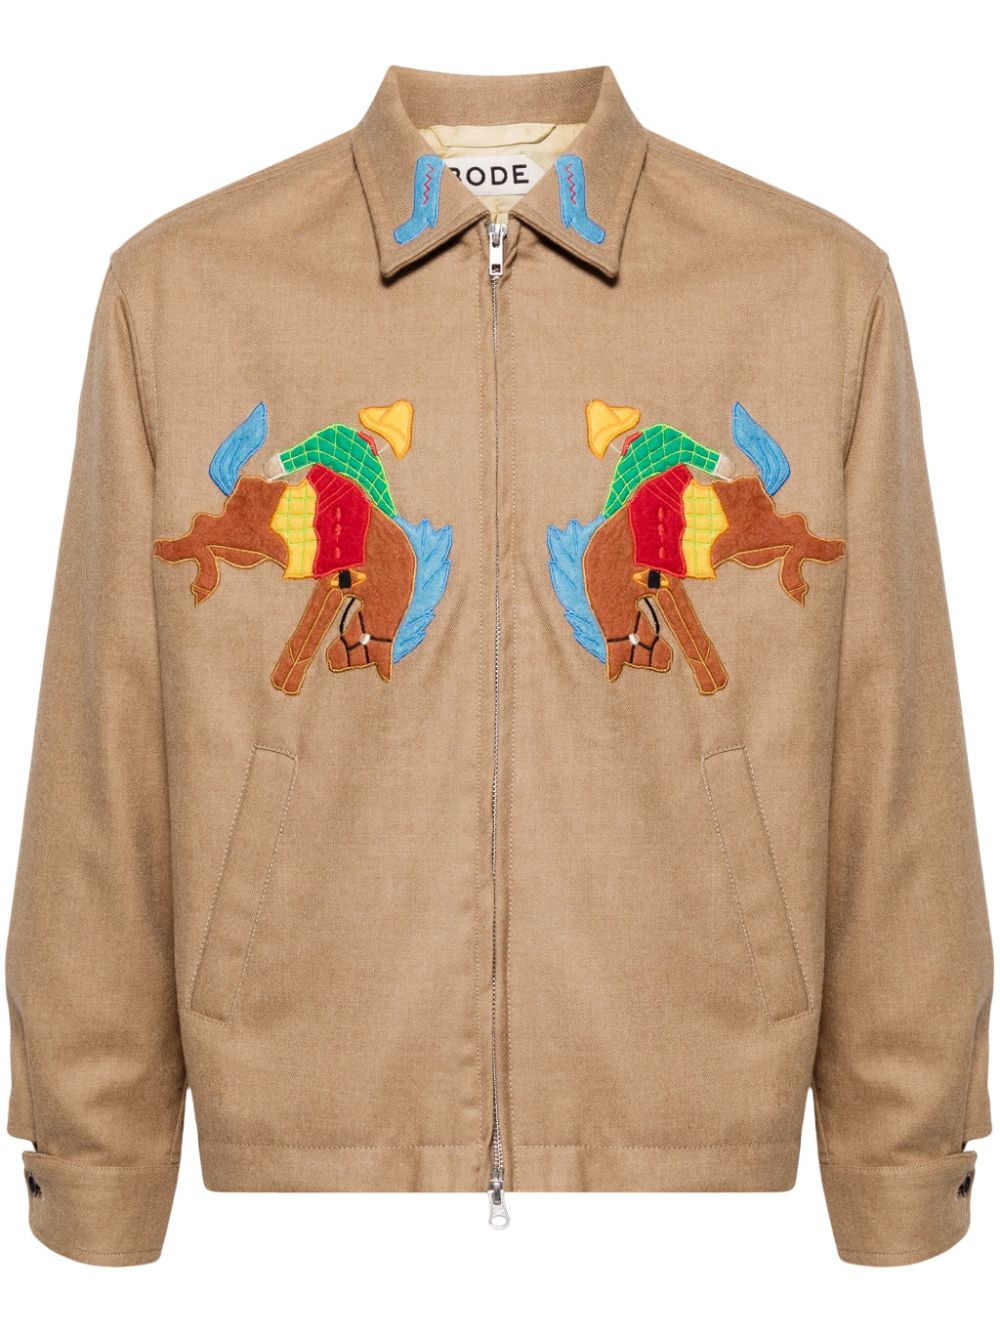 Rodeo Ohio embroidered jacket